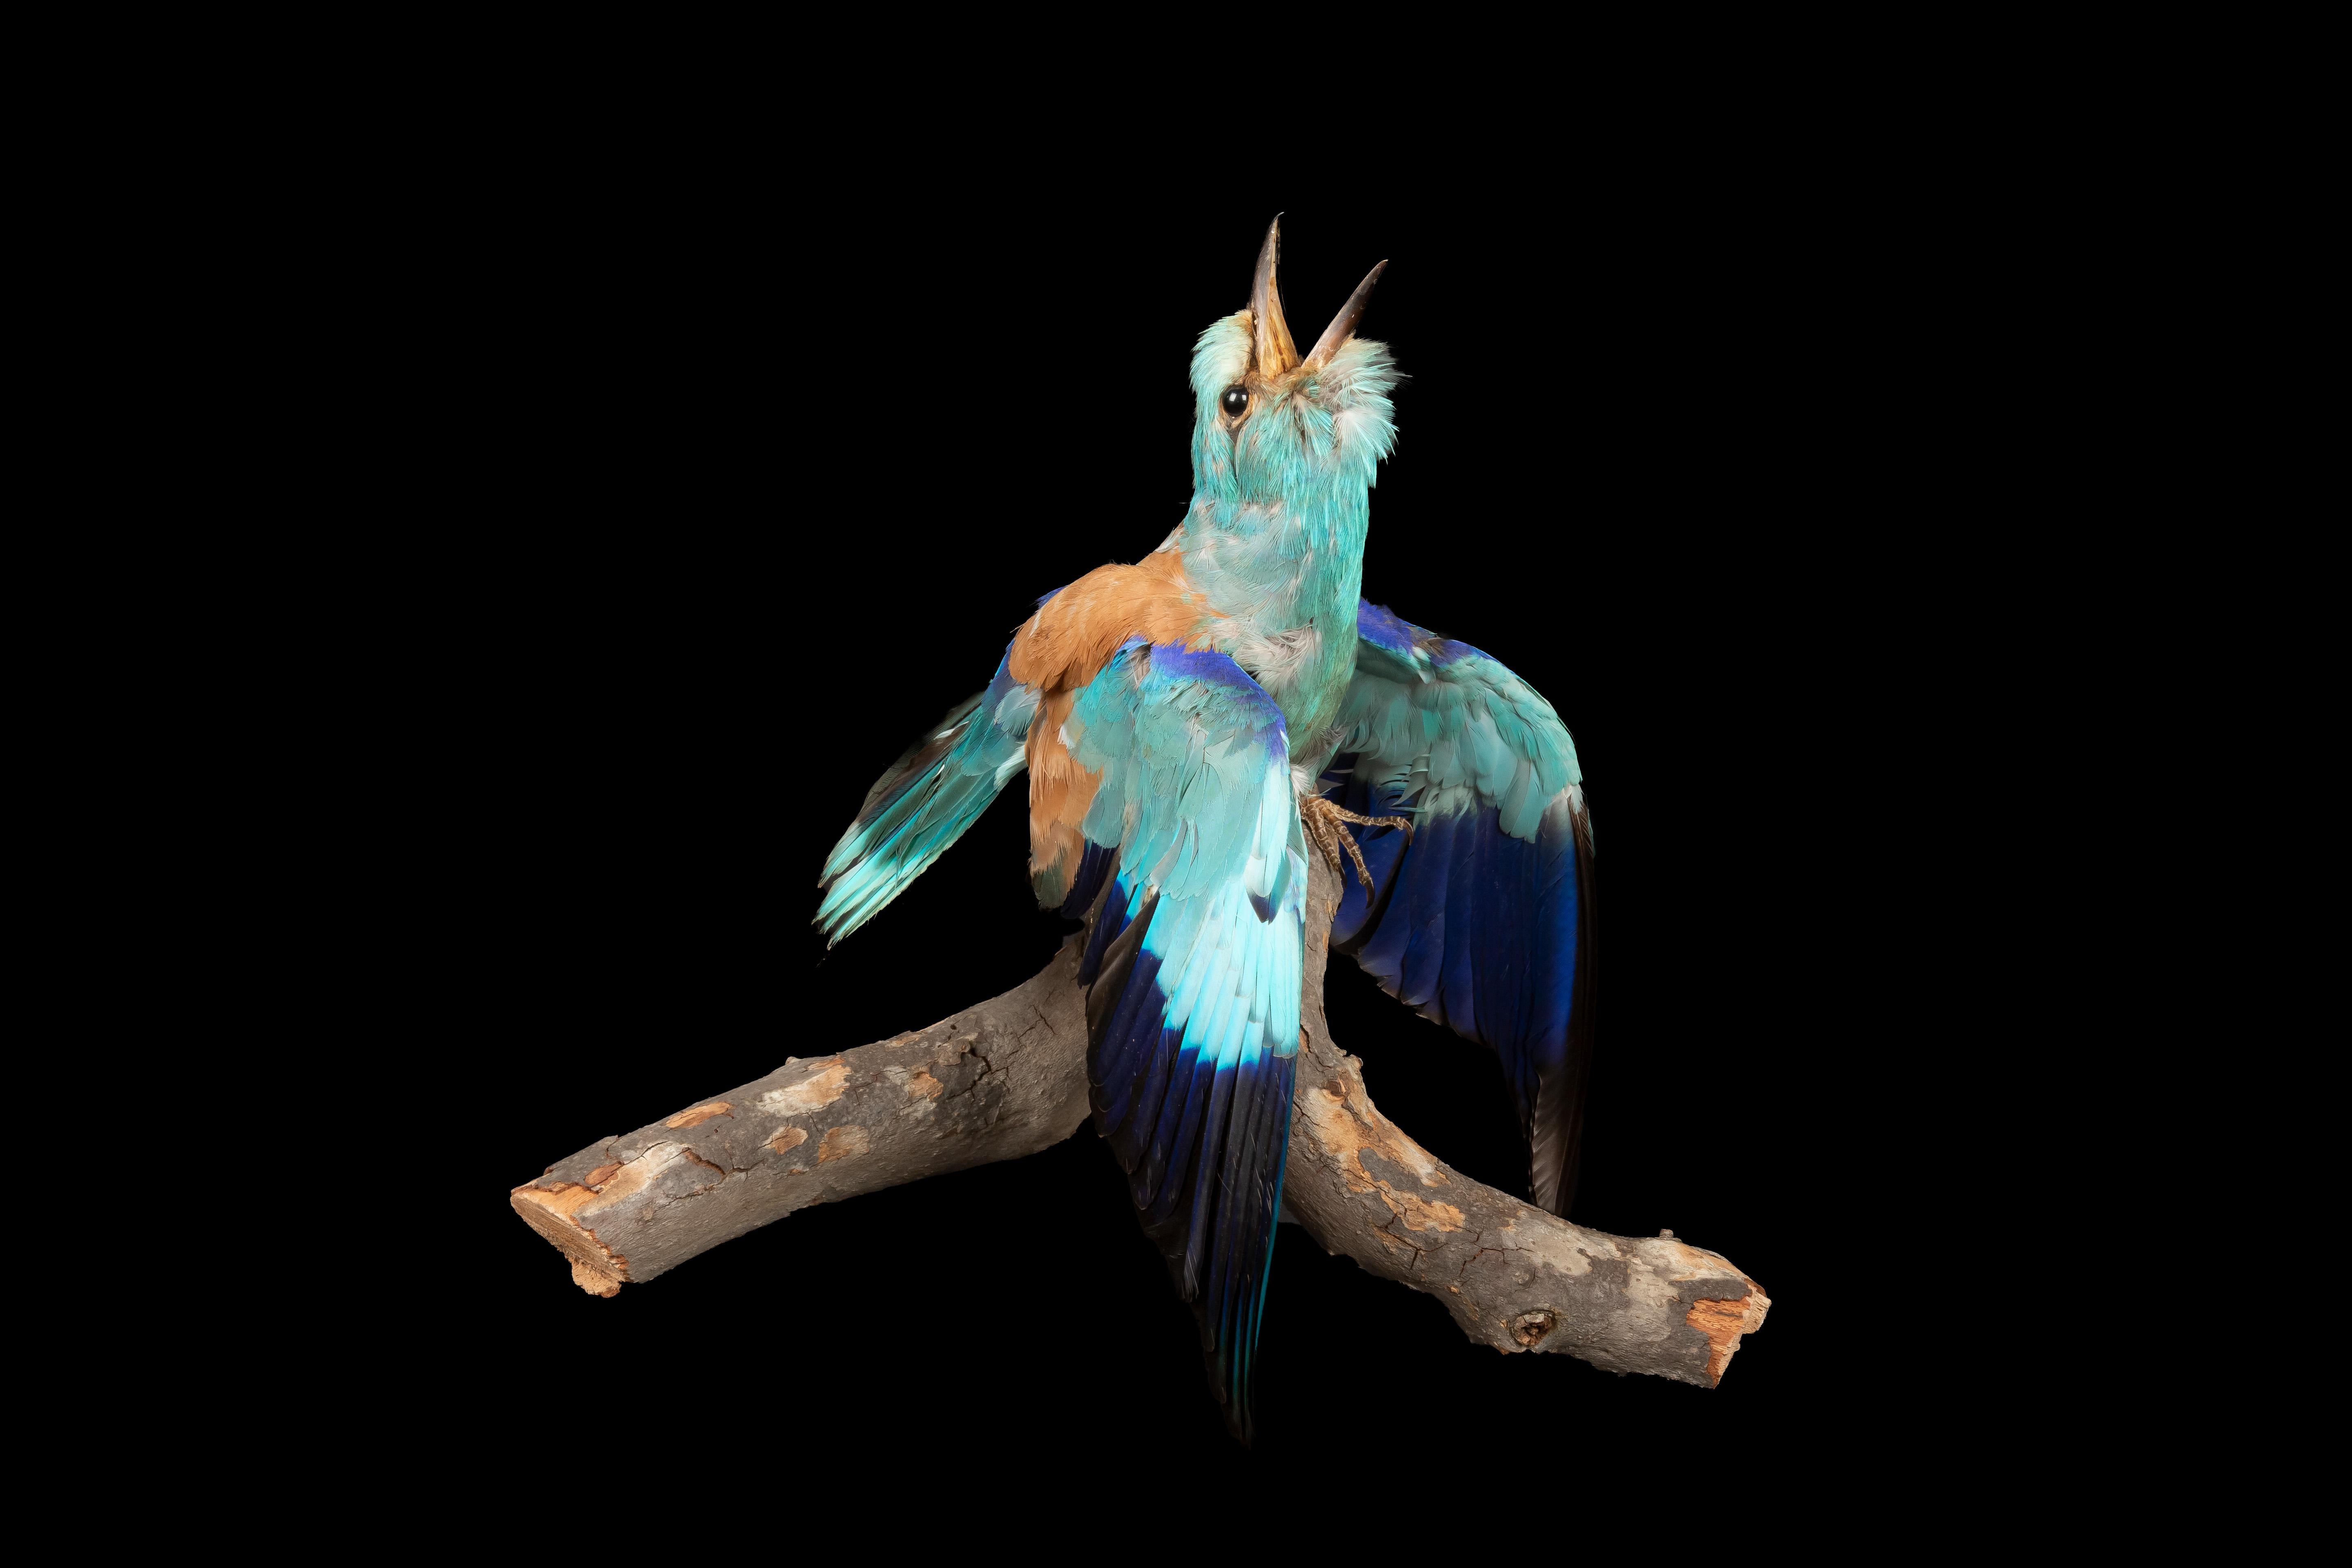 This exquisite European roller taxidermy specimen captures the beauty of the only member of the roller family of birds to breed in Europe. With its vibrant plumage and distinctive appearance, this piece is a stunning representation of this bird's